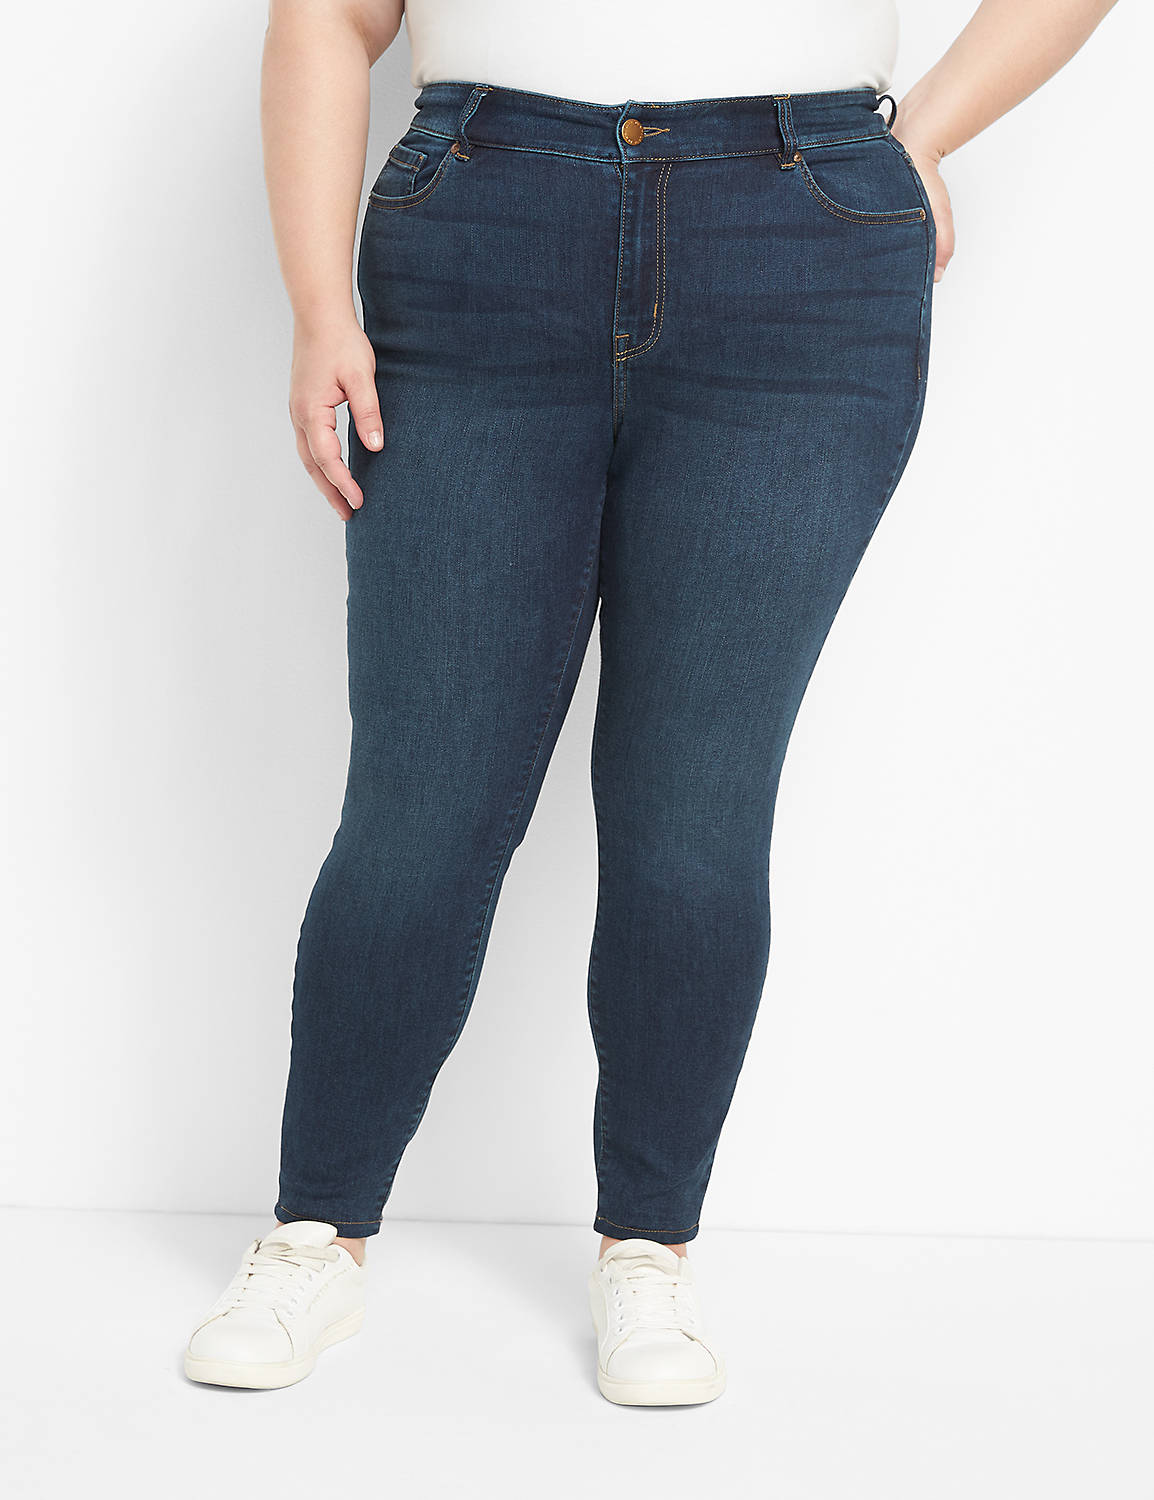 DELUXE HIGHER RISE SKINNY - DONATEL Product Image 1